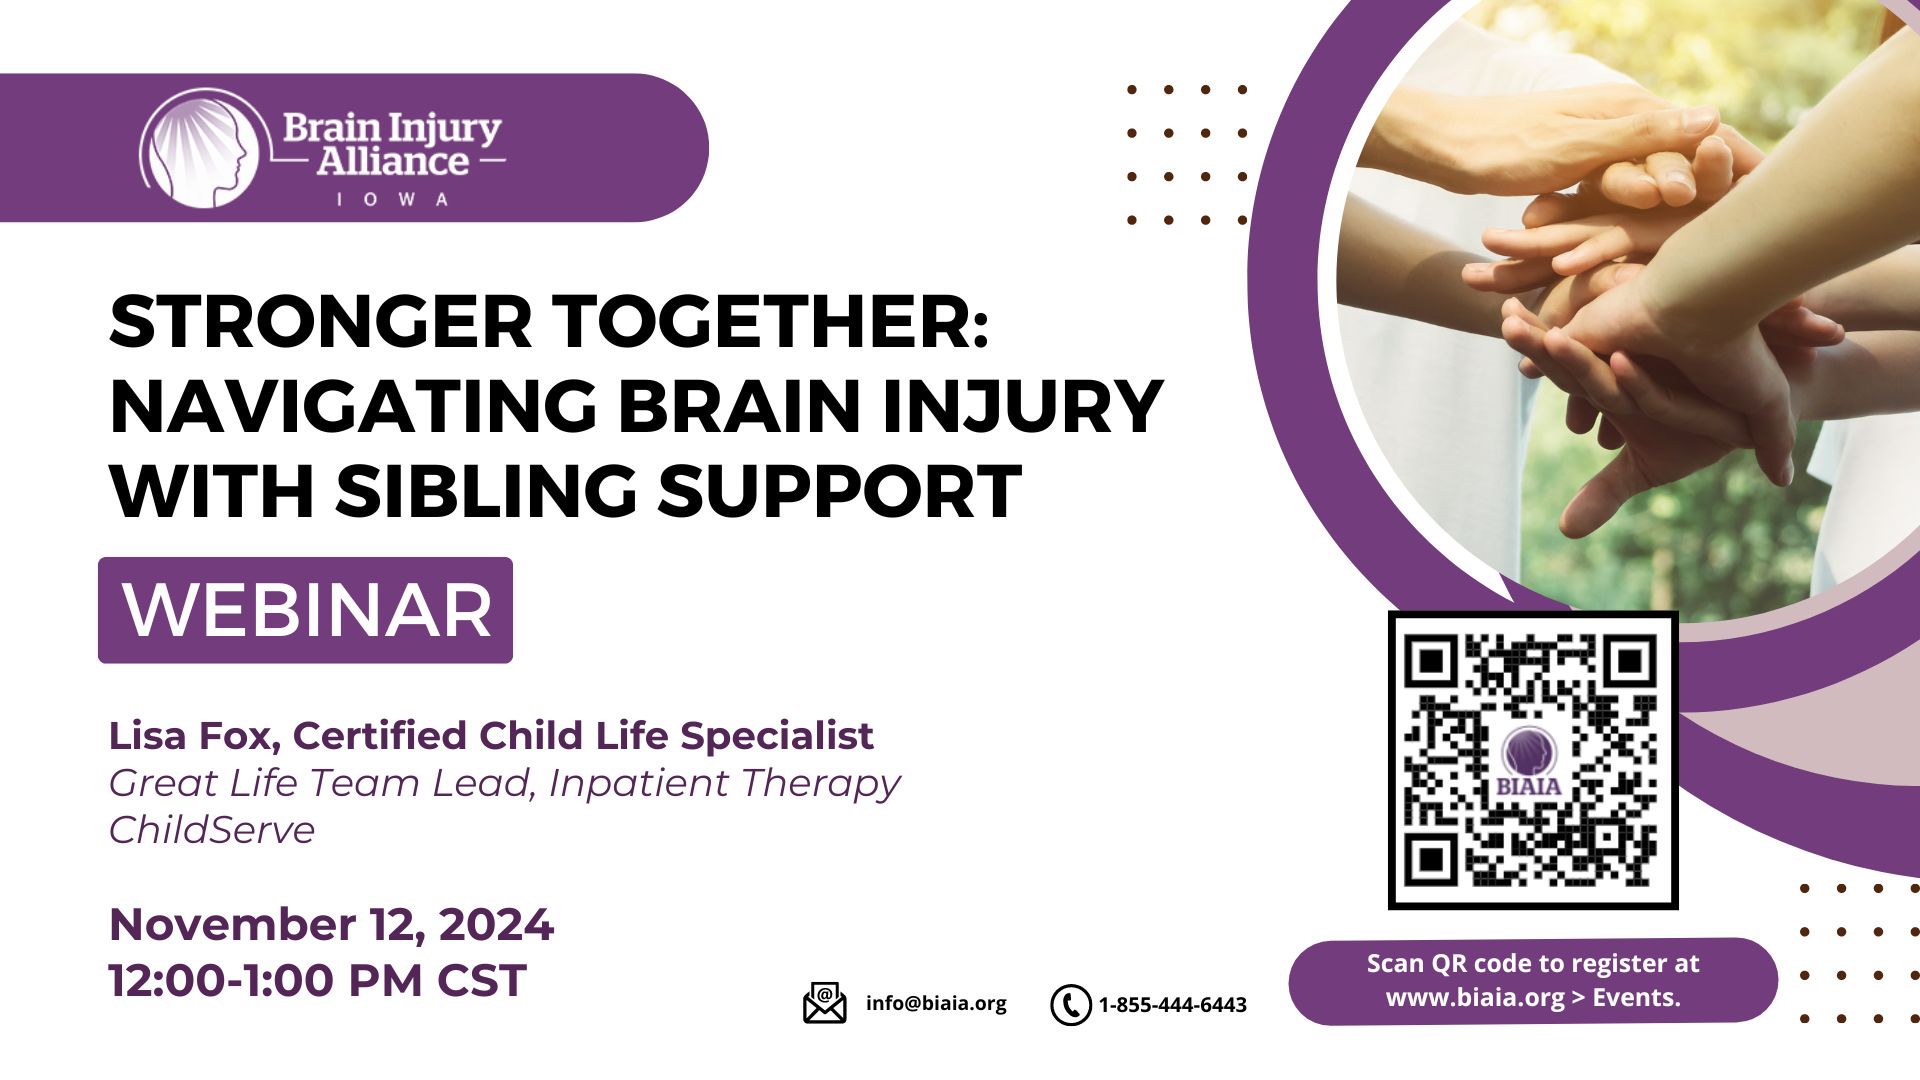 Stronger Together: Navigating Brain Injury with Sibling Support